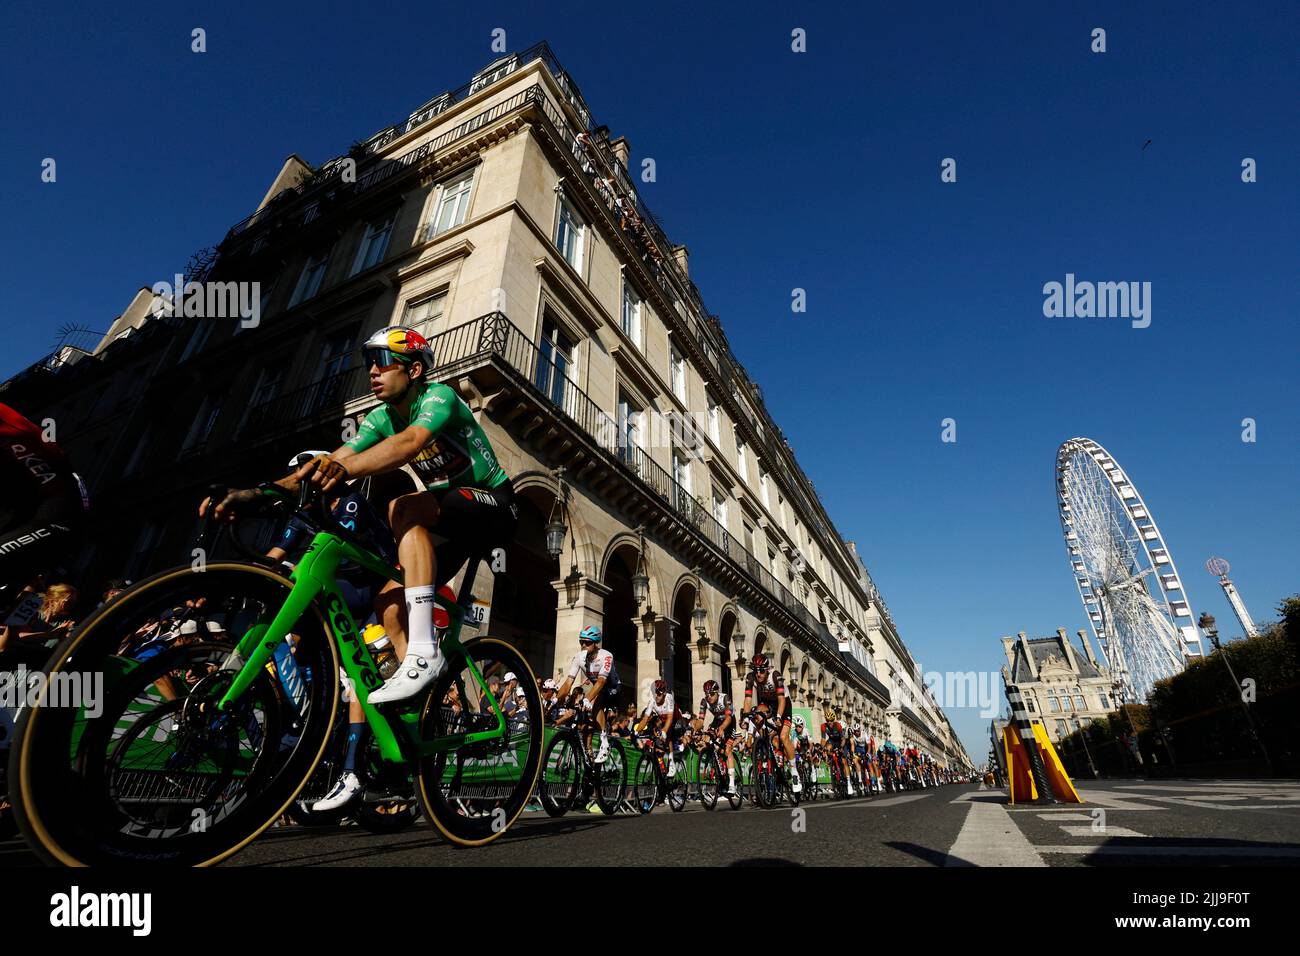 Cycling - Tour de France - Stage 21 - Paris La Defense Arena to Champs-Elysees - France - July 24, 2022 Jumbo - Visma's Wout Van Aert in action with riders during stage 21 REUTERS/Gonzalo Fuentes Stock Photo